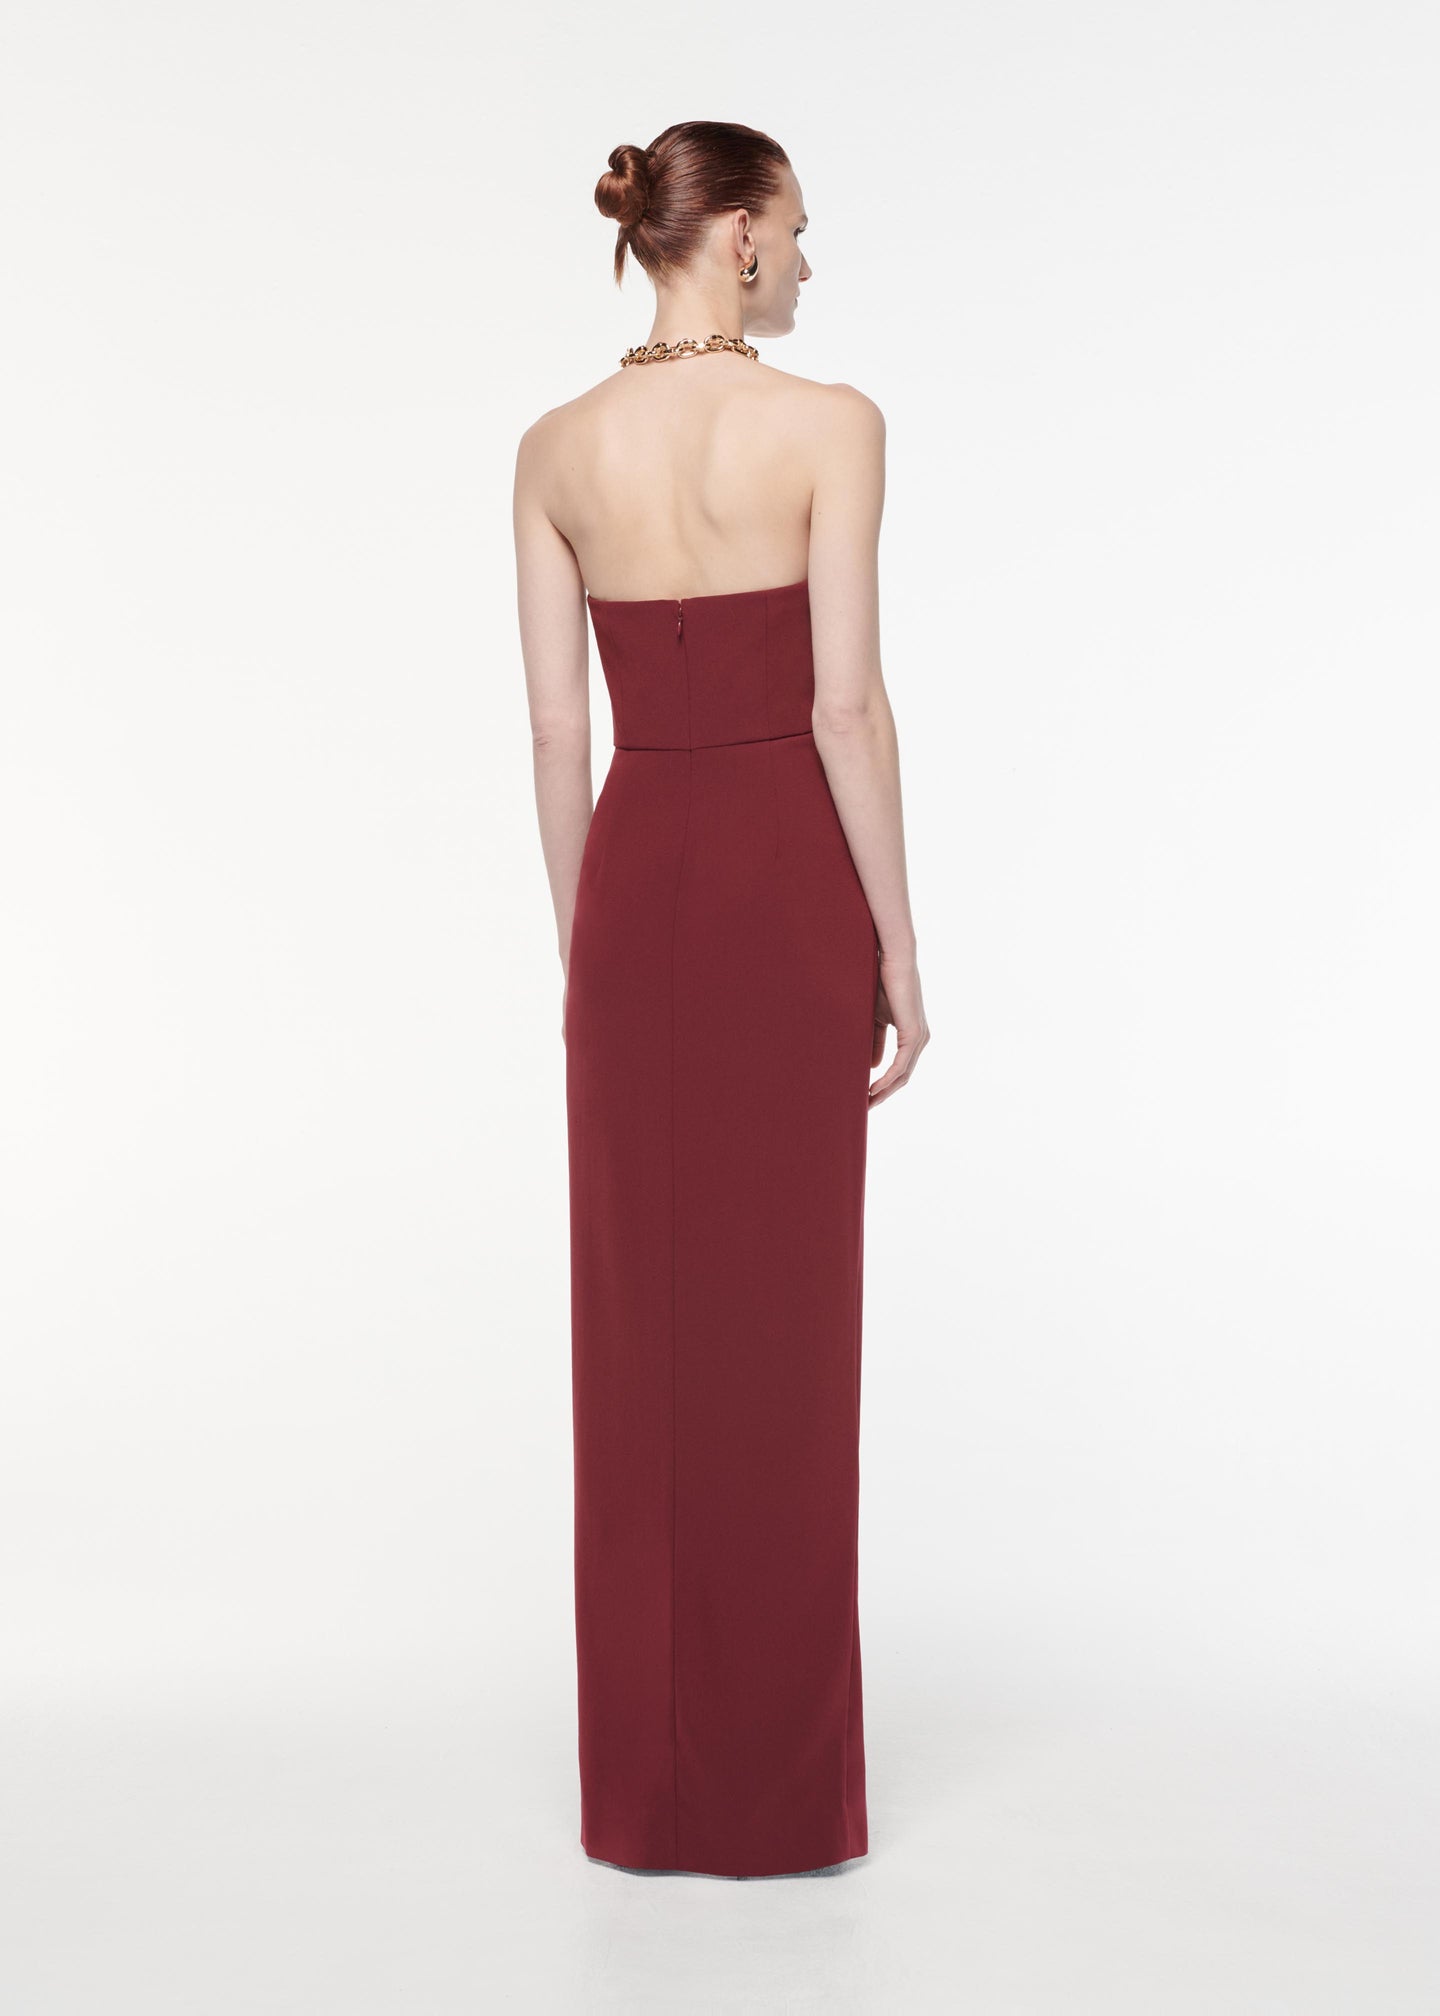 A photograph of a woman wearing a Strapless Satin Crepe Gown in Burgundy